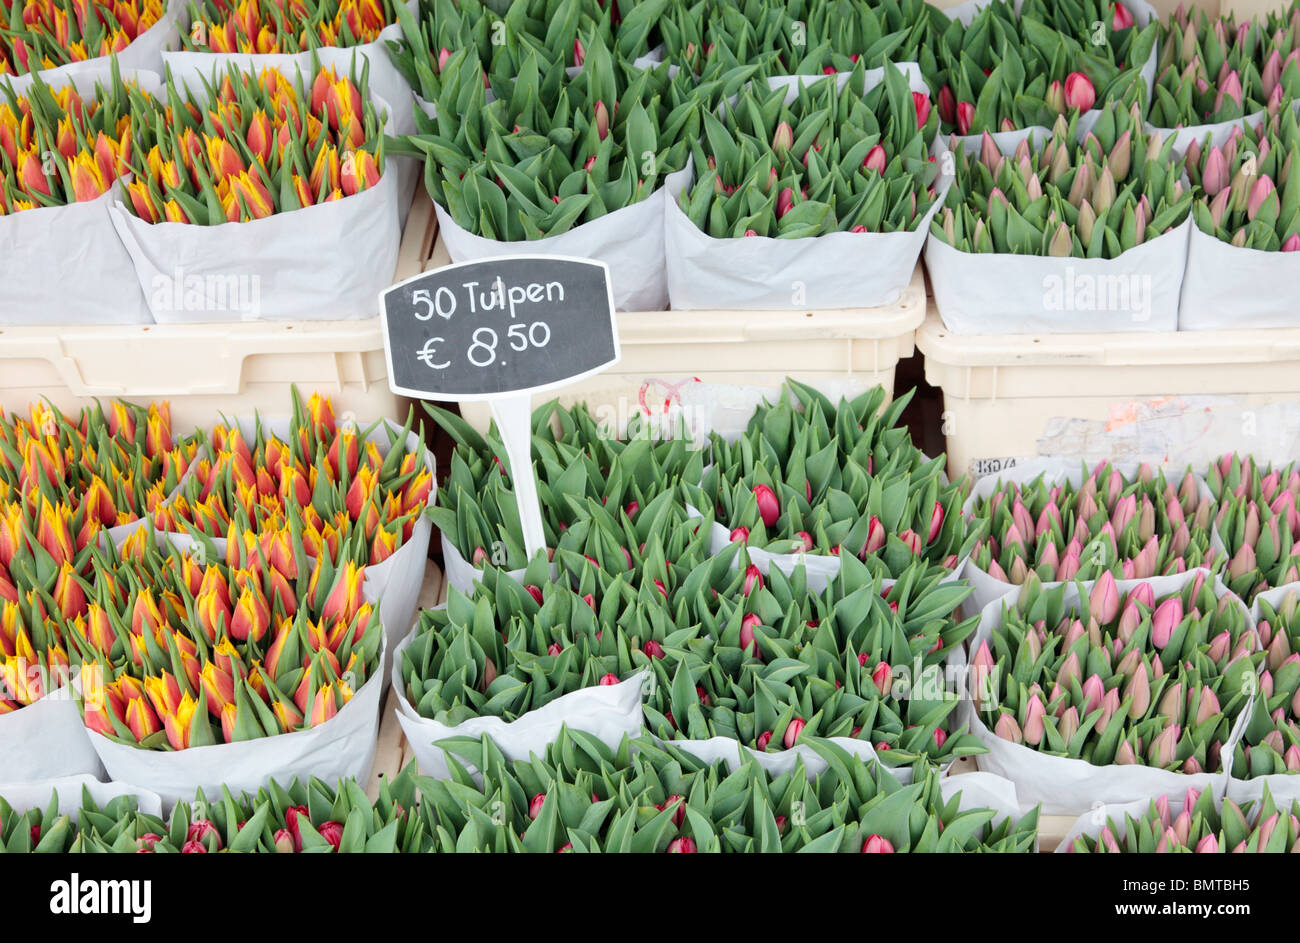 Tulips for Sale Stock Photo